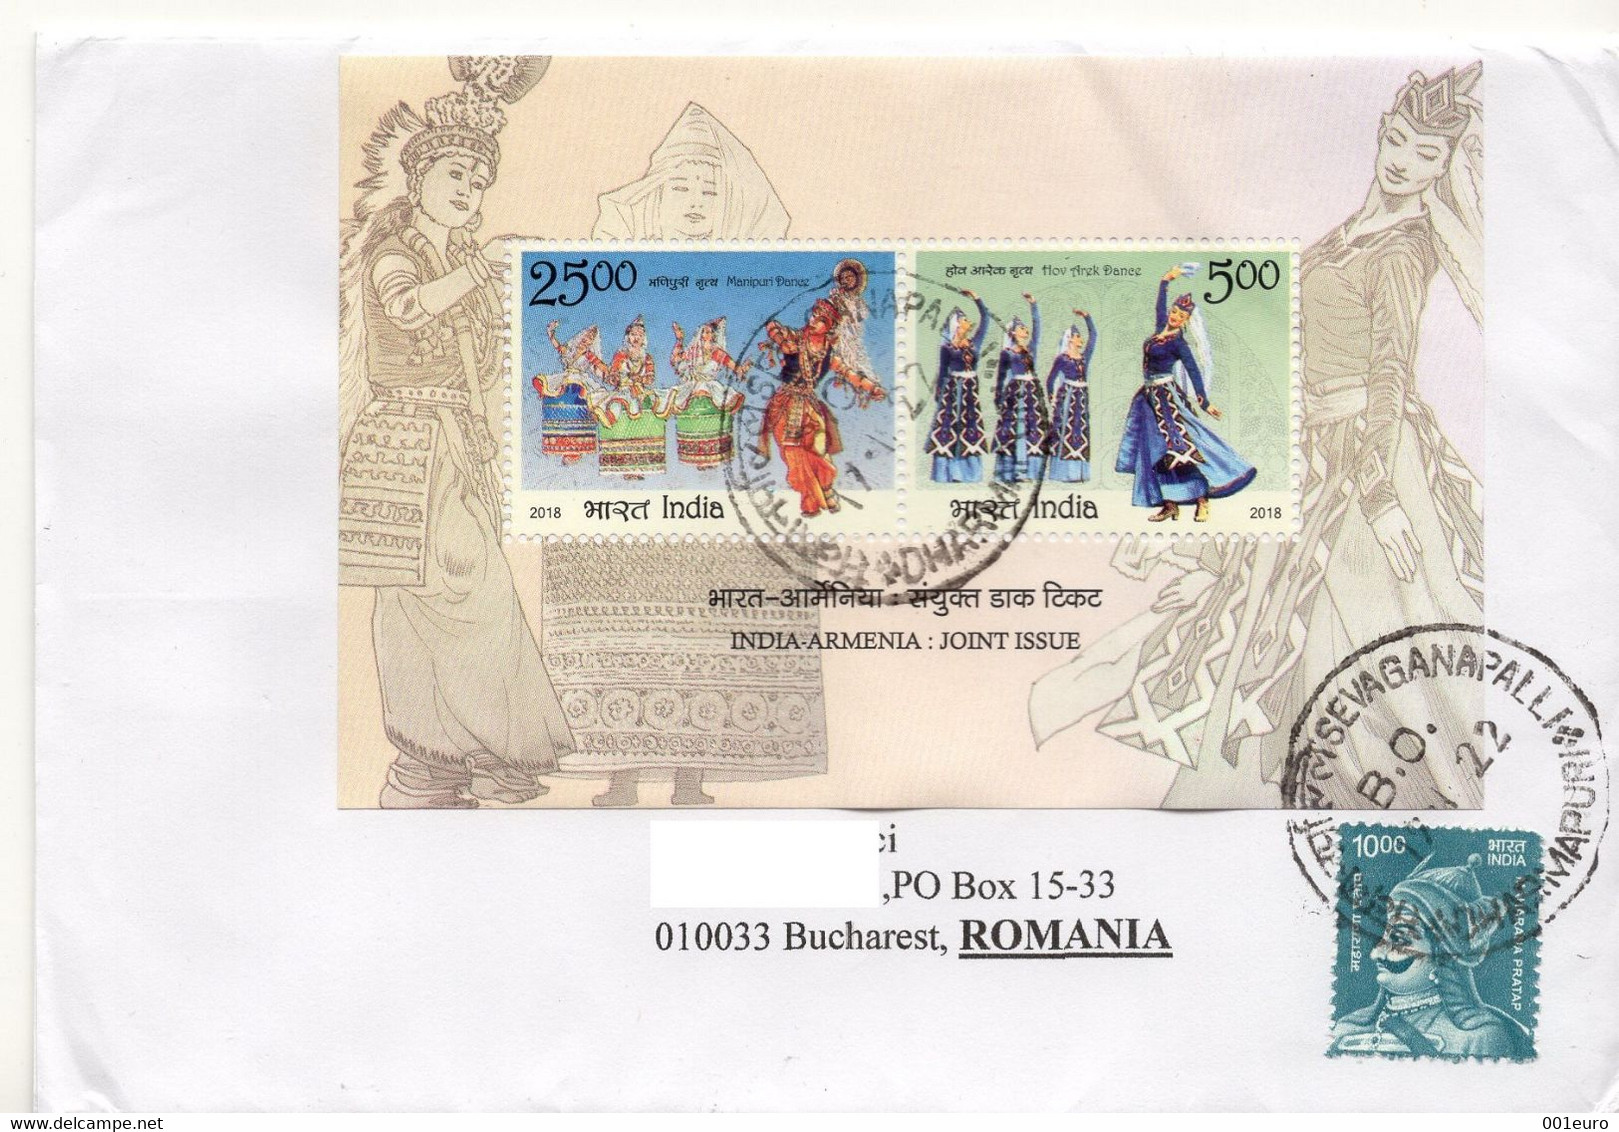 INDIA 2018: JOINT ISSUE INDIA - ARMENIA, DANCES Cover Sent To Romania - Registered Shipping! - Gebruikt